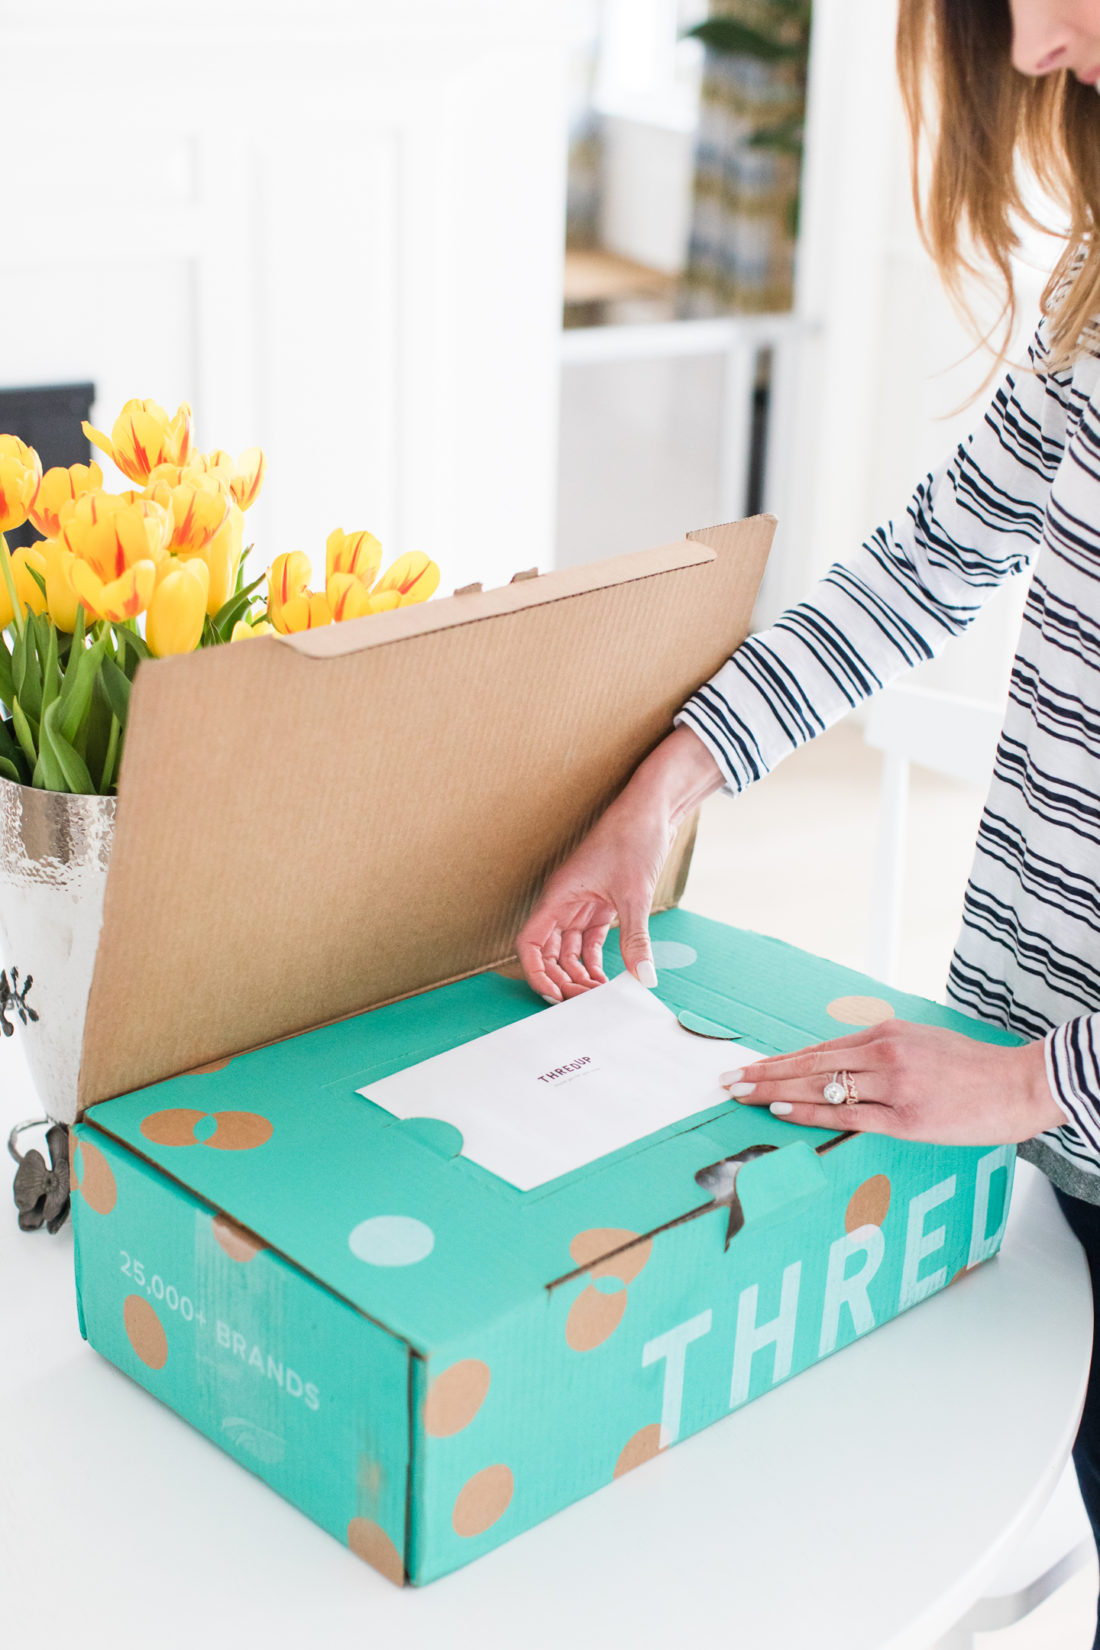 A detail of the cute polka dot packaging of the thredUP delivery box